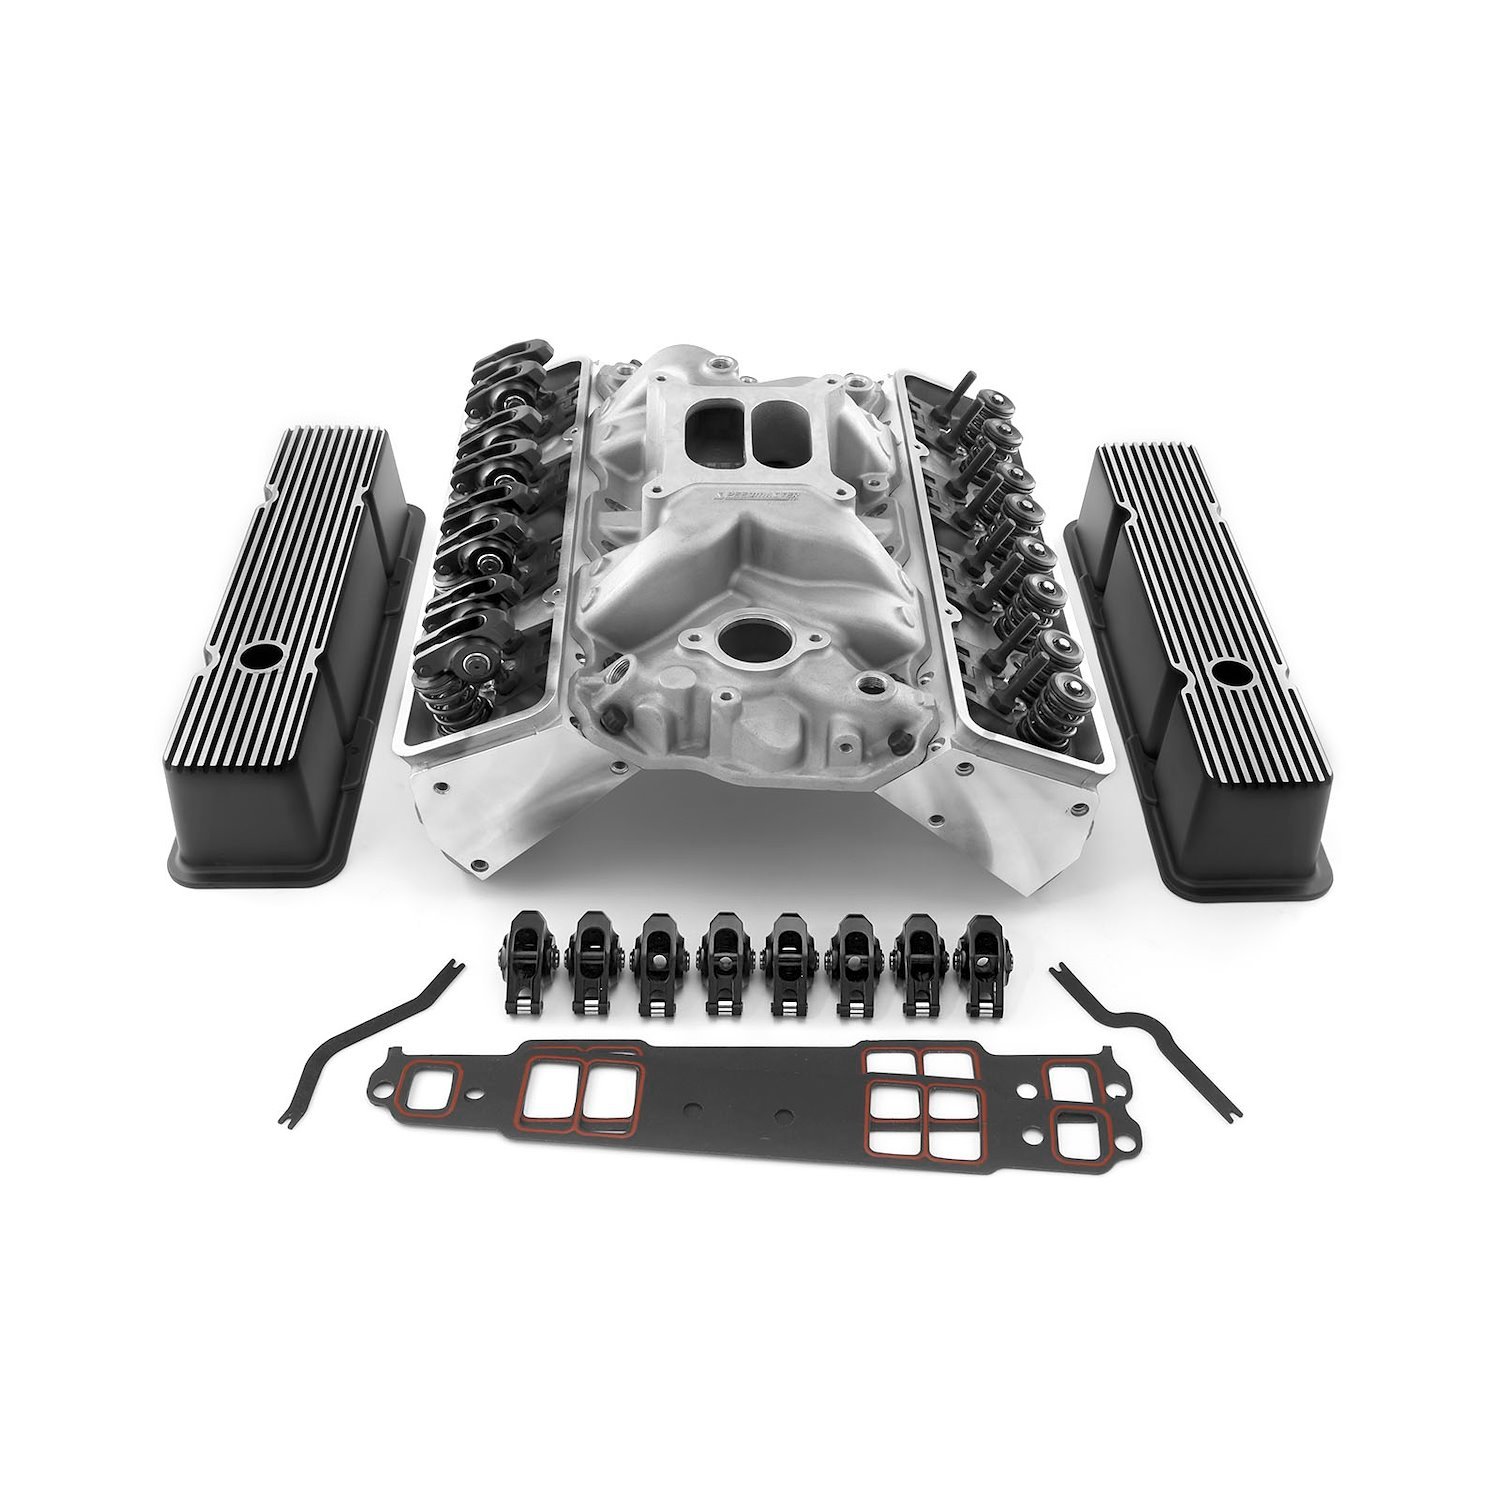 1-435-005 Chevy SBC 350 Straight Cylinder Head Top End Engine Combo Kit Solid/Mechanical F